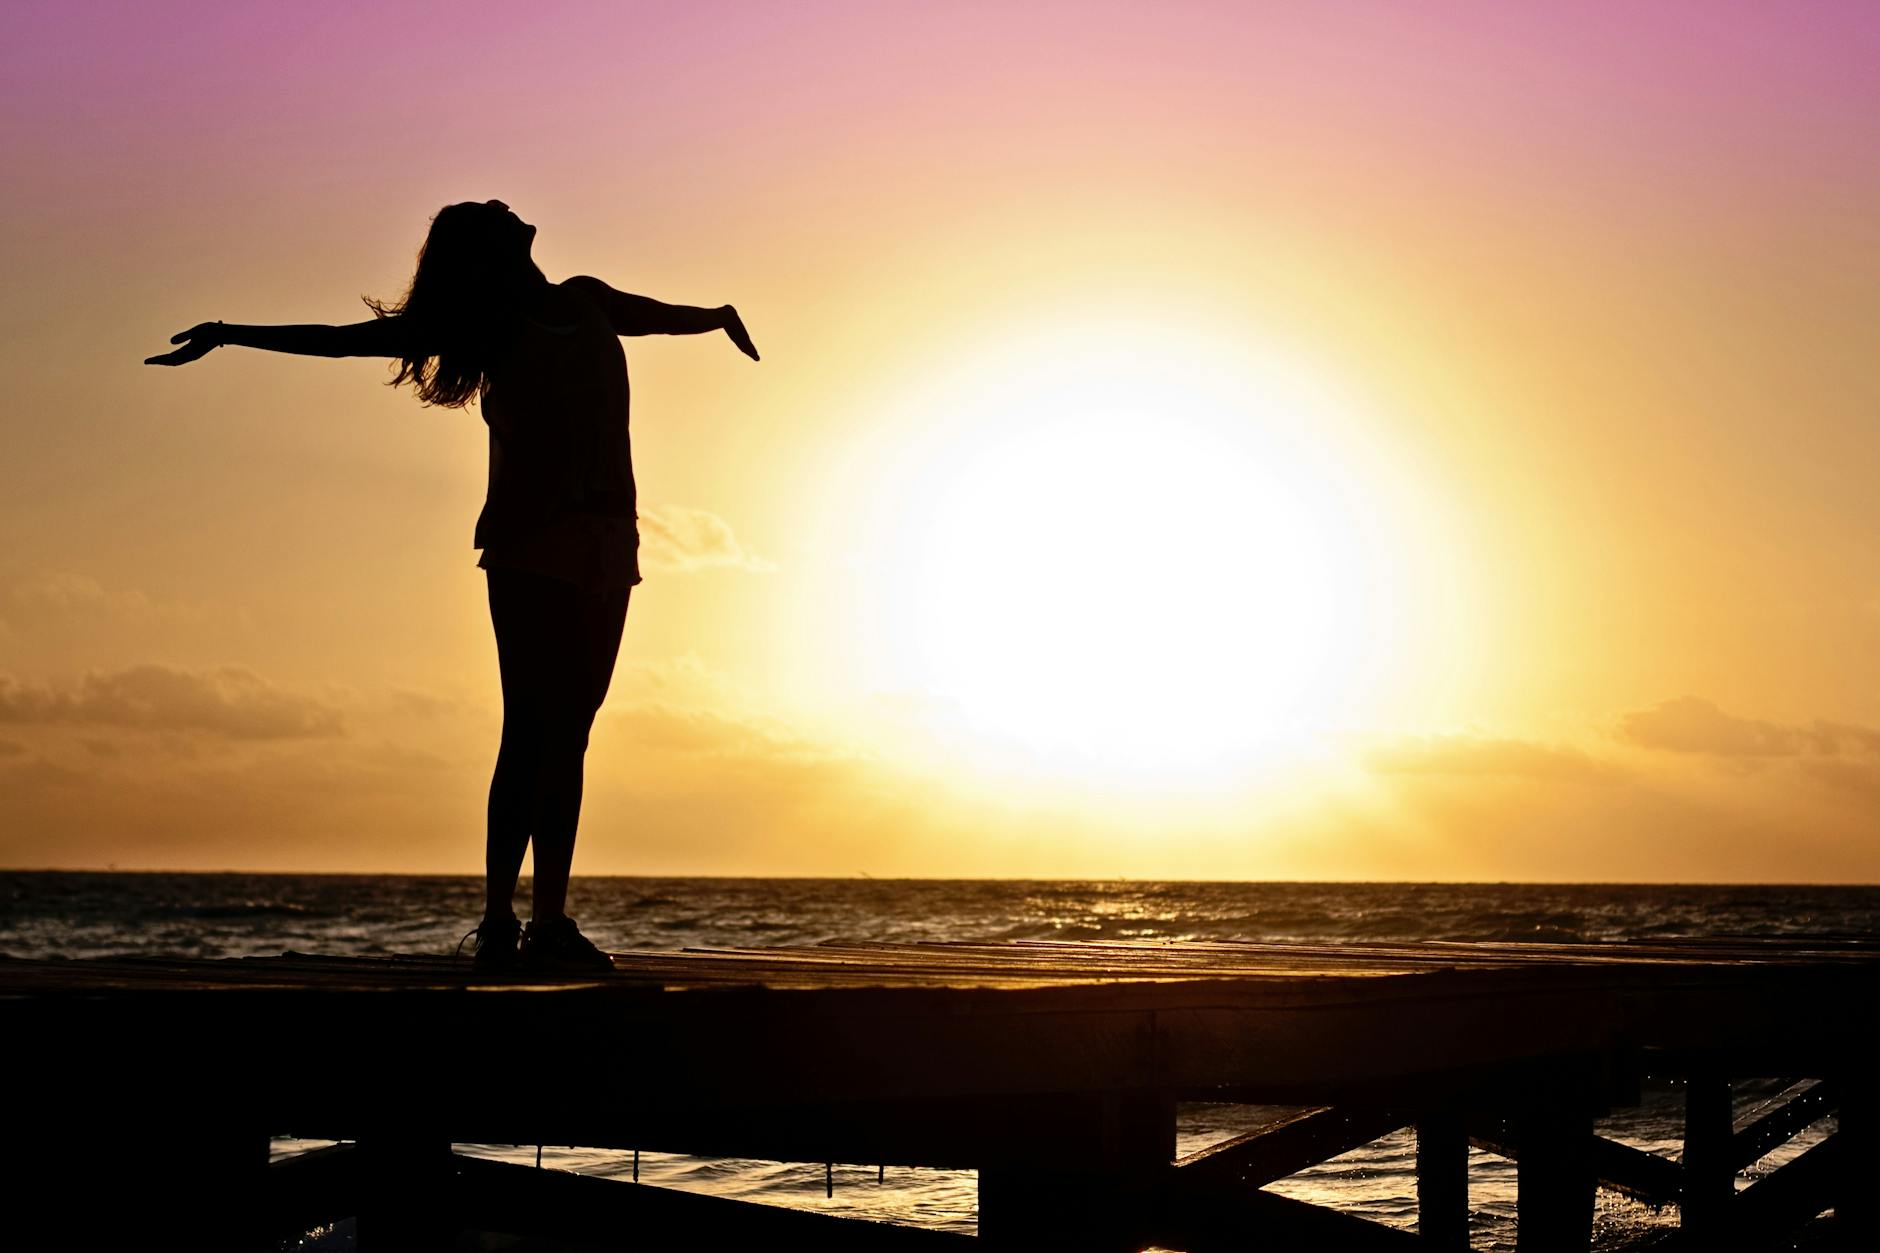 a woman stands in front of a rising sun with her arms outstretched